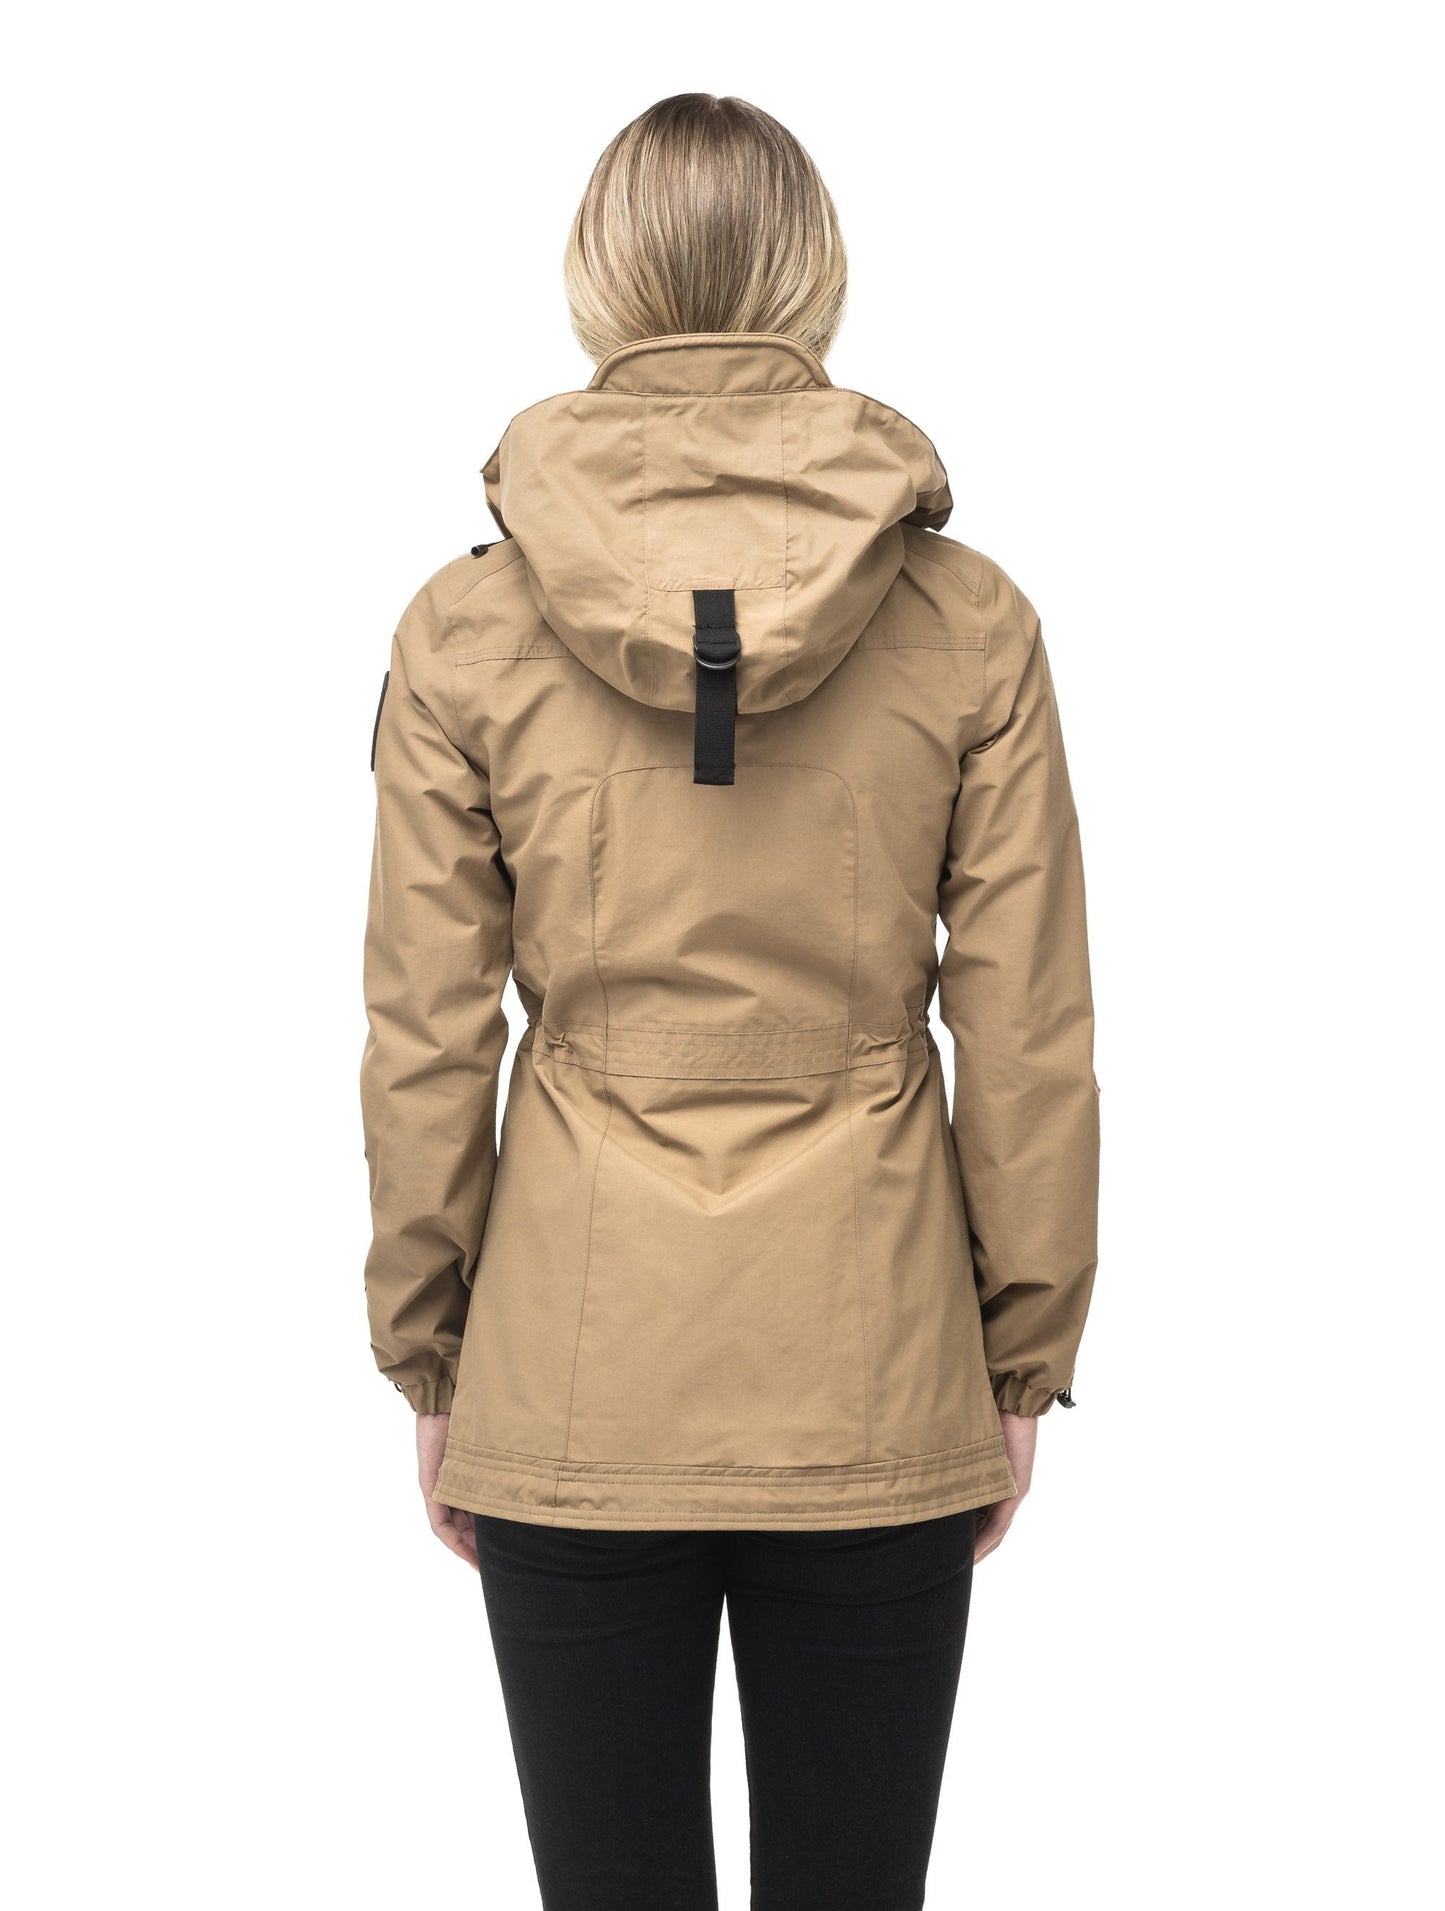 Women's hooded shirt jacket with four front pockets and adjustable waist in Cork